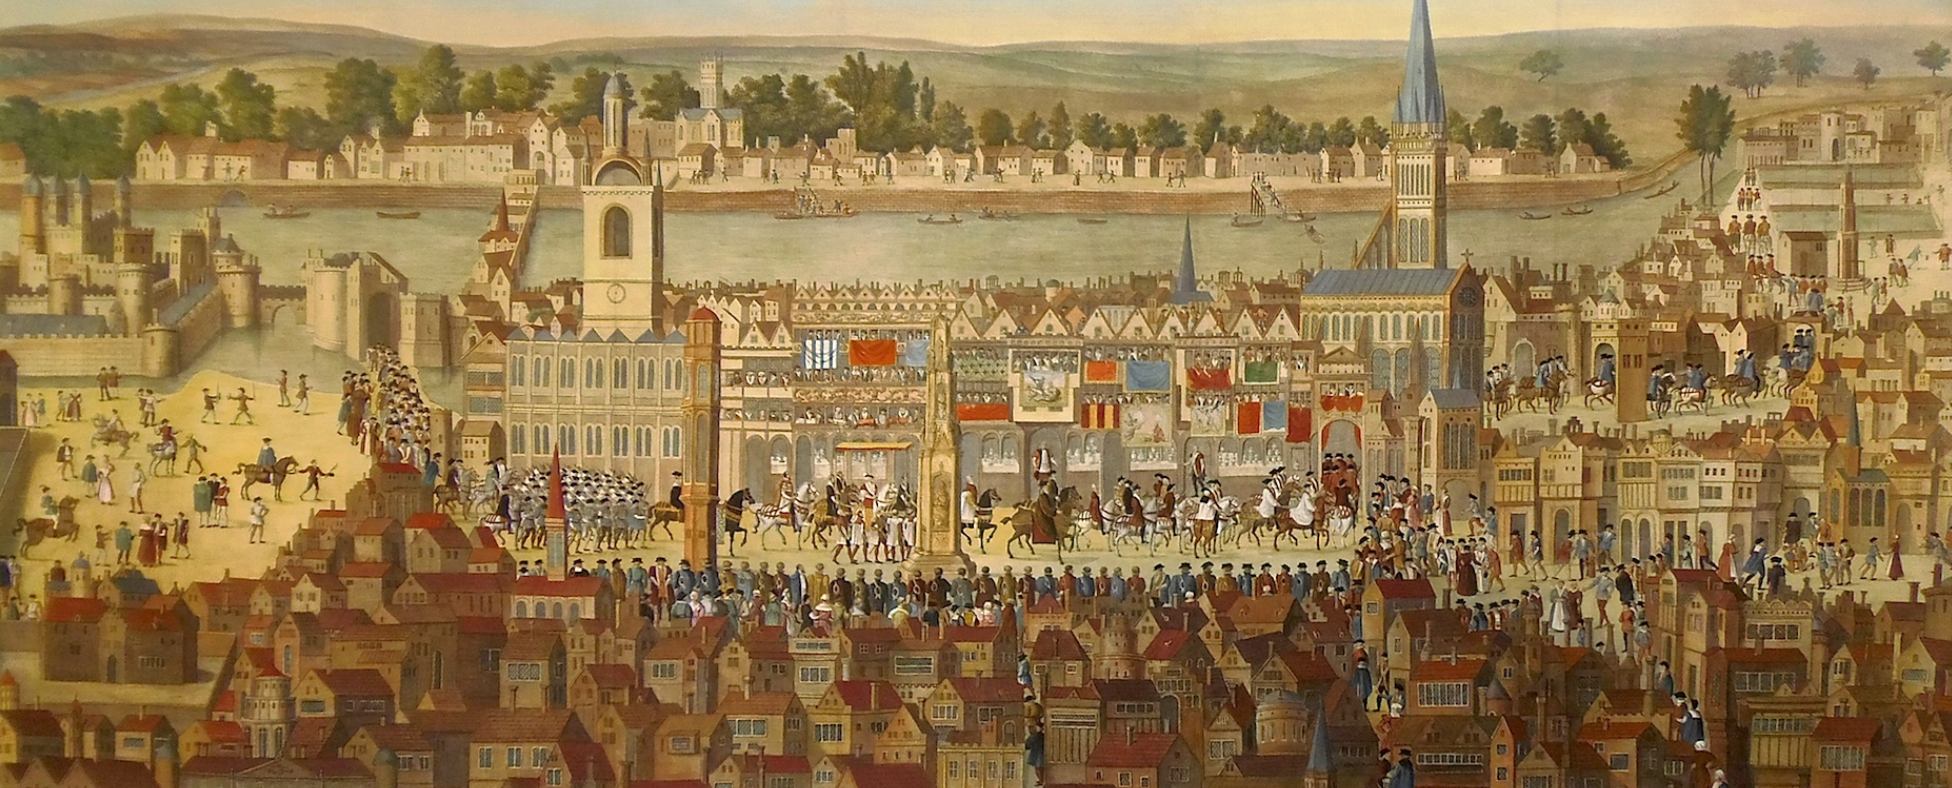 The Coronation of King Edward VI & a View of Cheapside